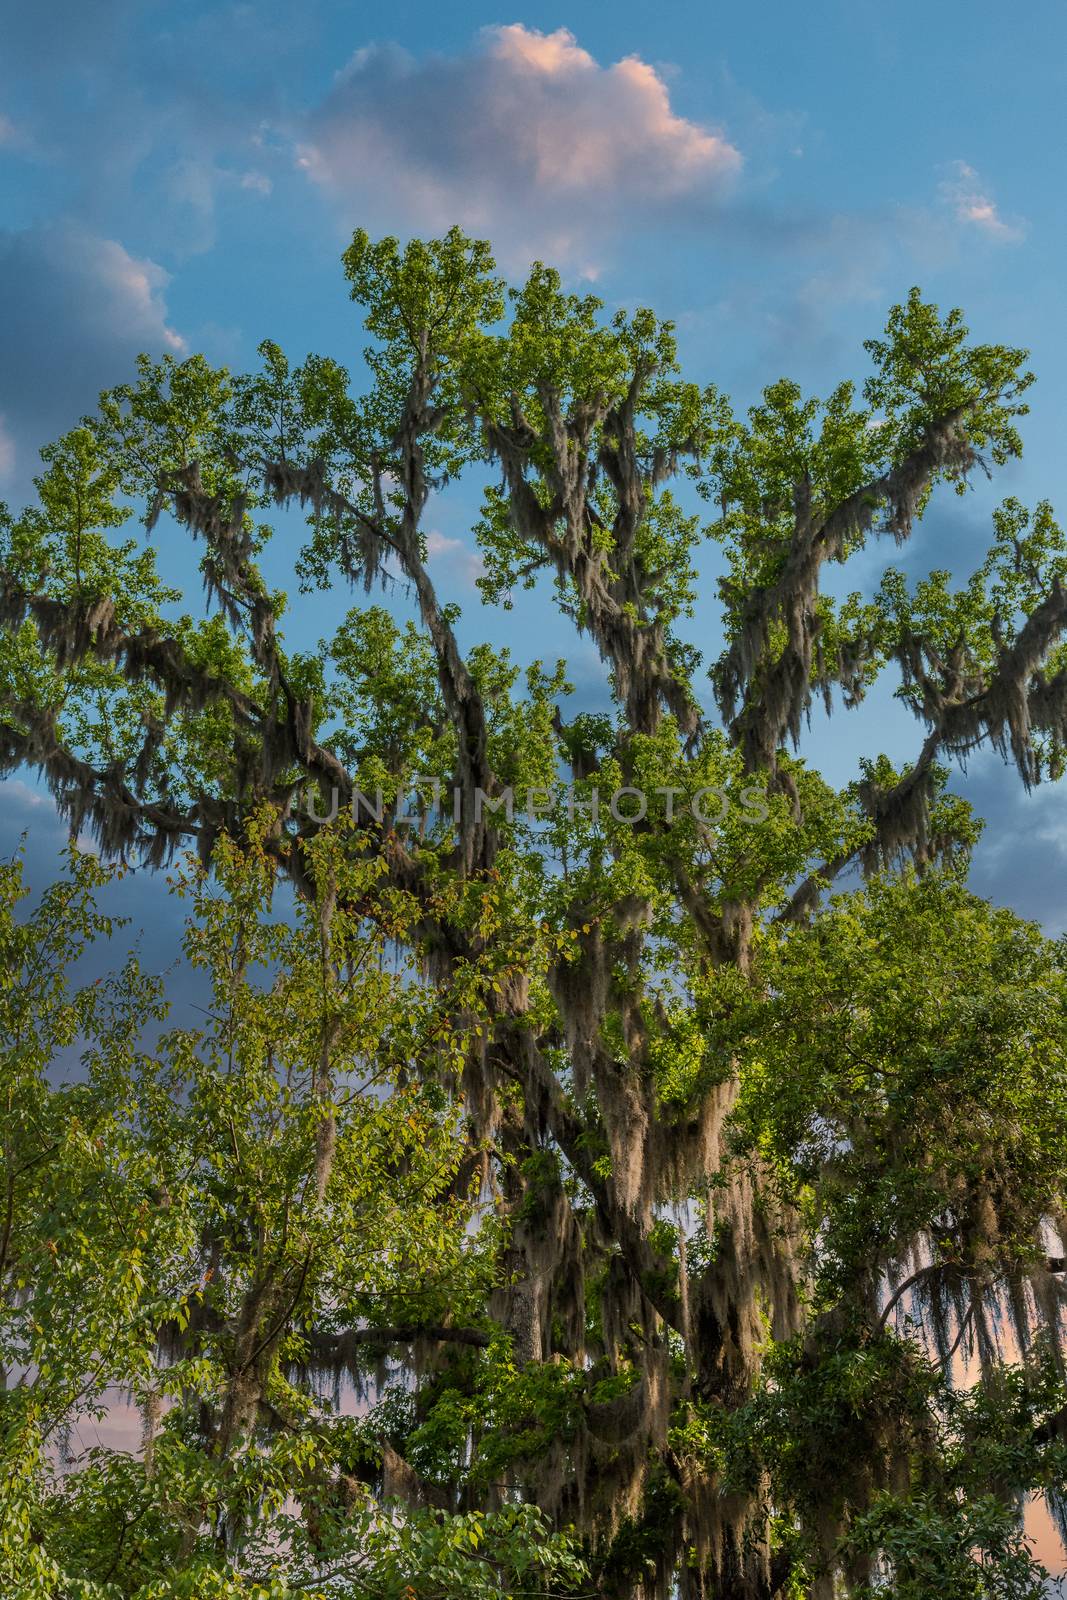 Spanish Moss growing on old oak trees in the southern United States